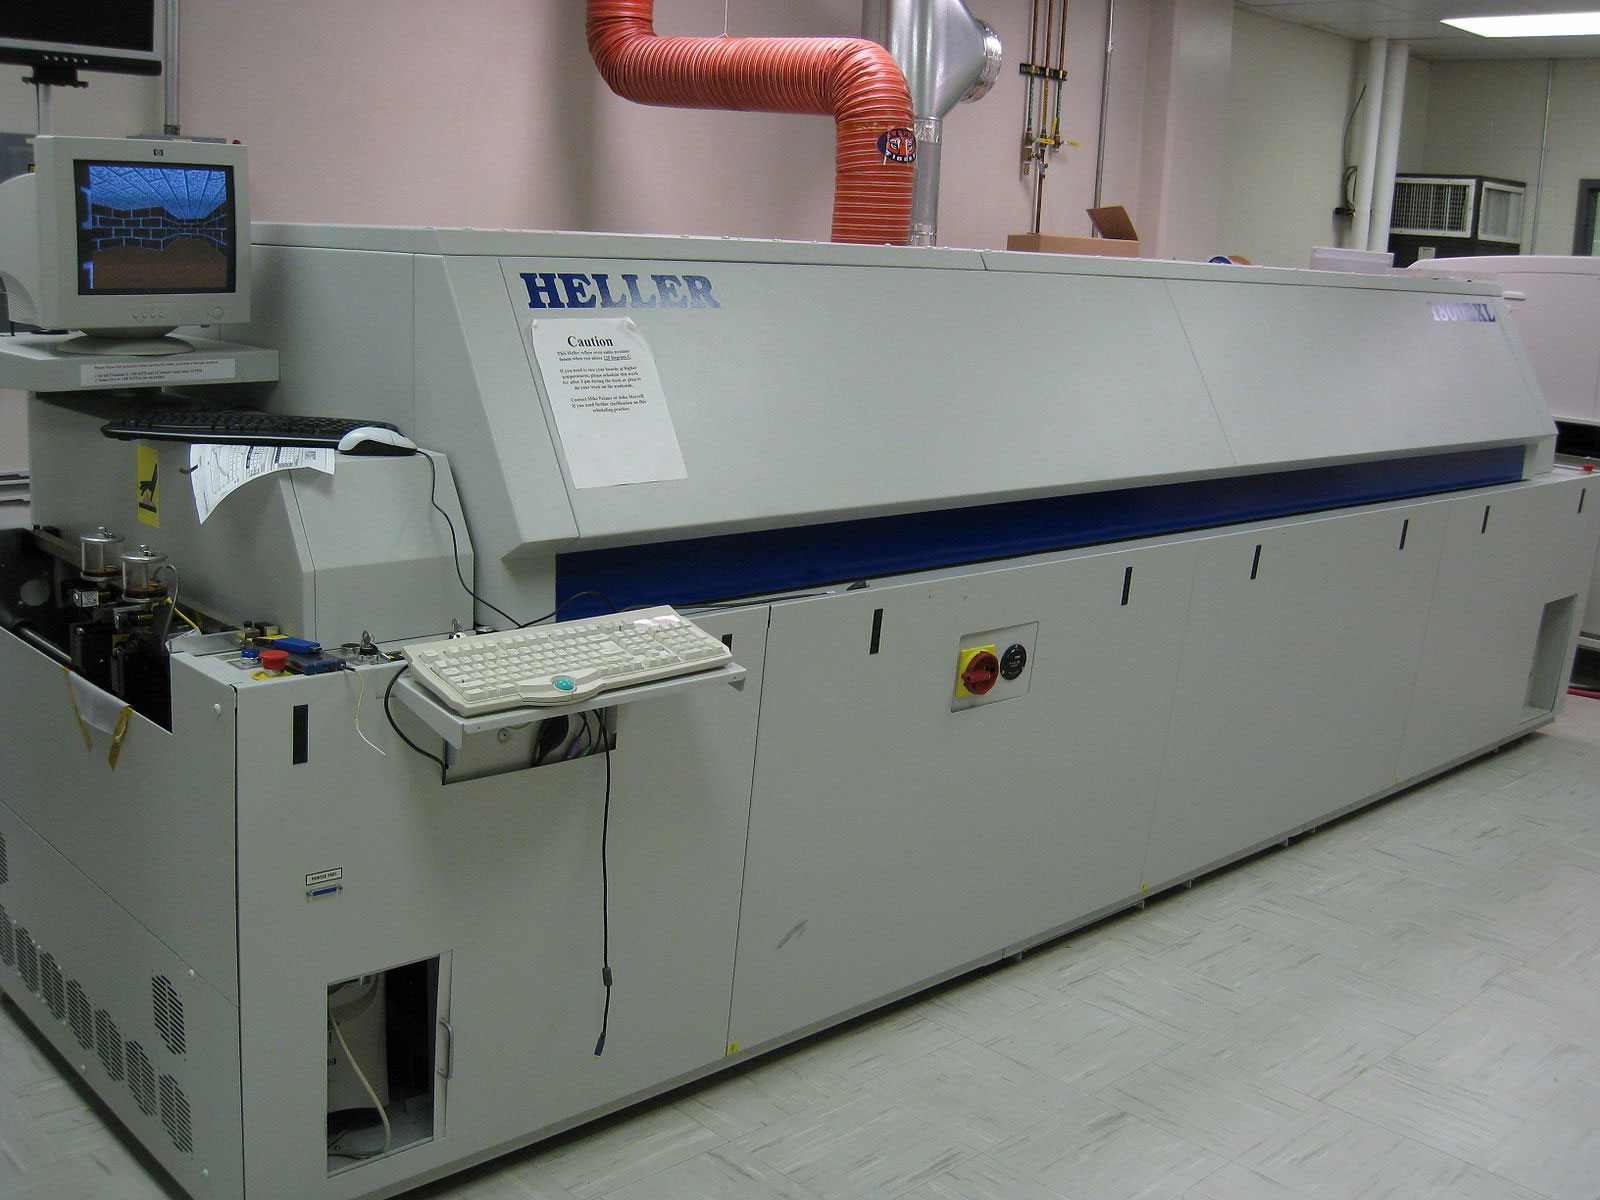 A reflow oven